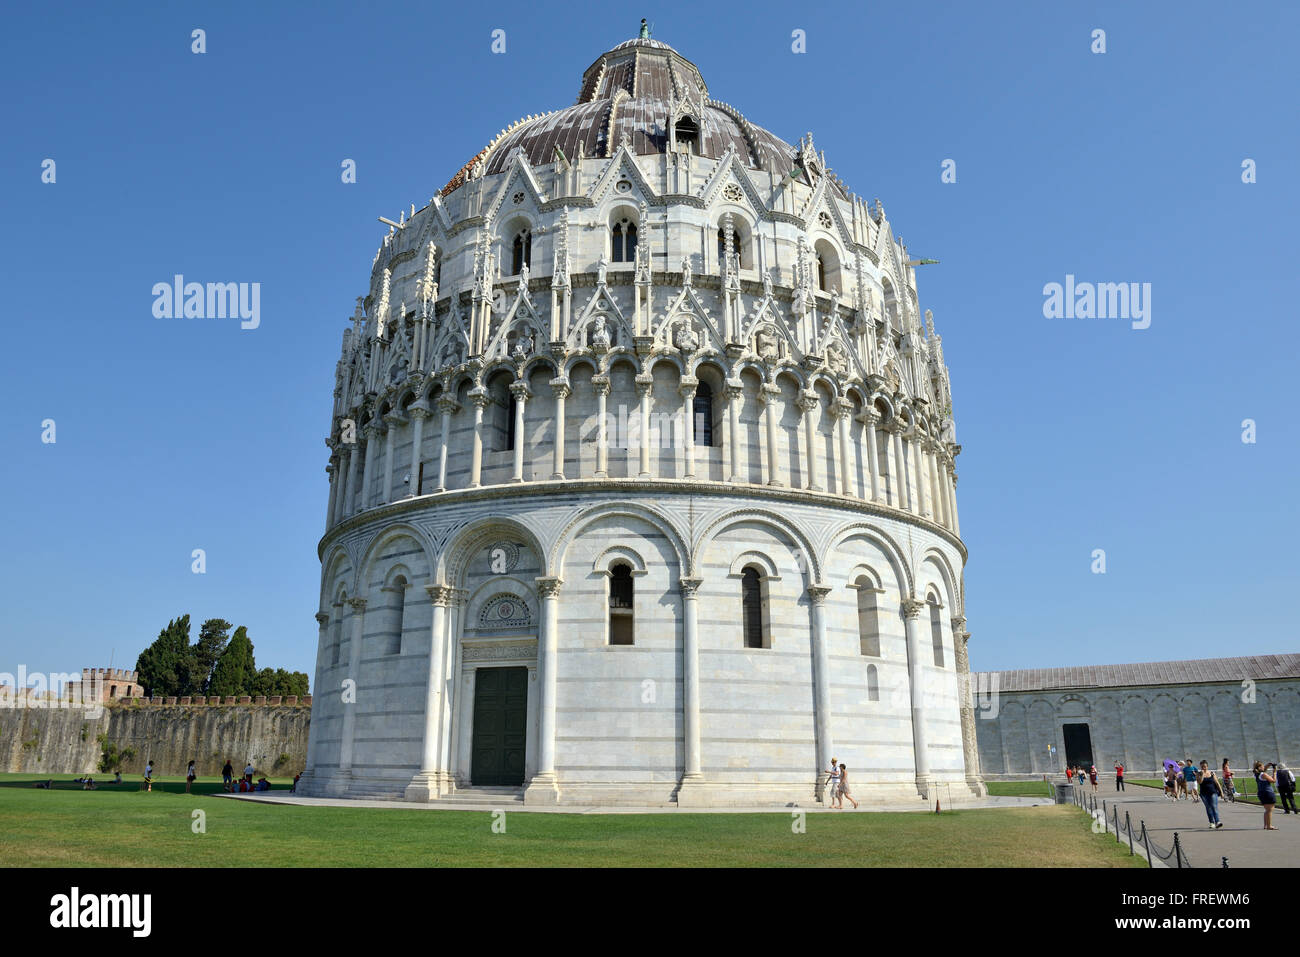 Baptistry of St. John, Piazza del Duomo, Cathedral Square, Campo dei Miracoli, Square of Miracles, UNESCO World Heritage Site, P Stock Photo